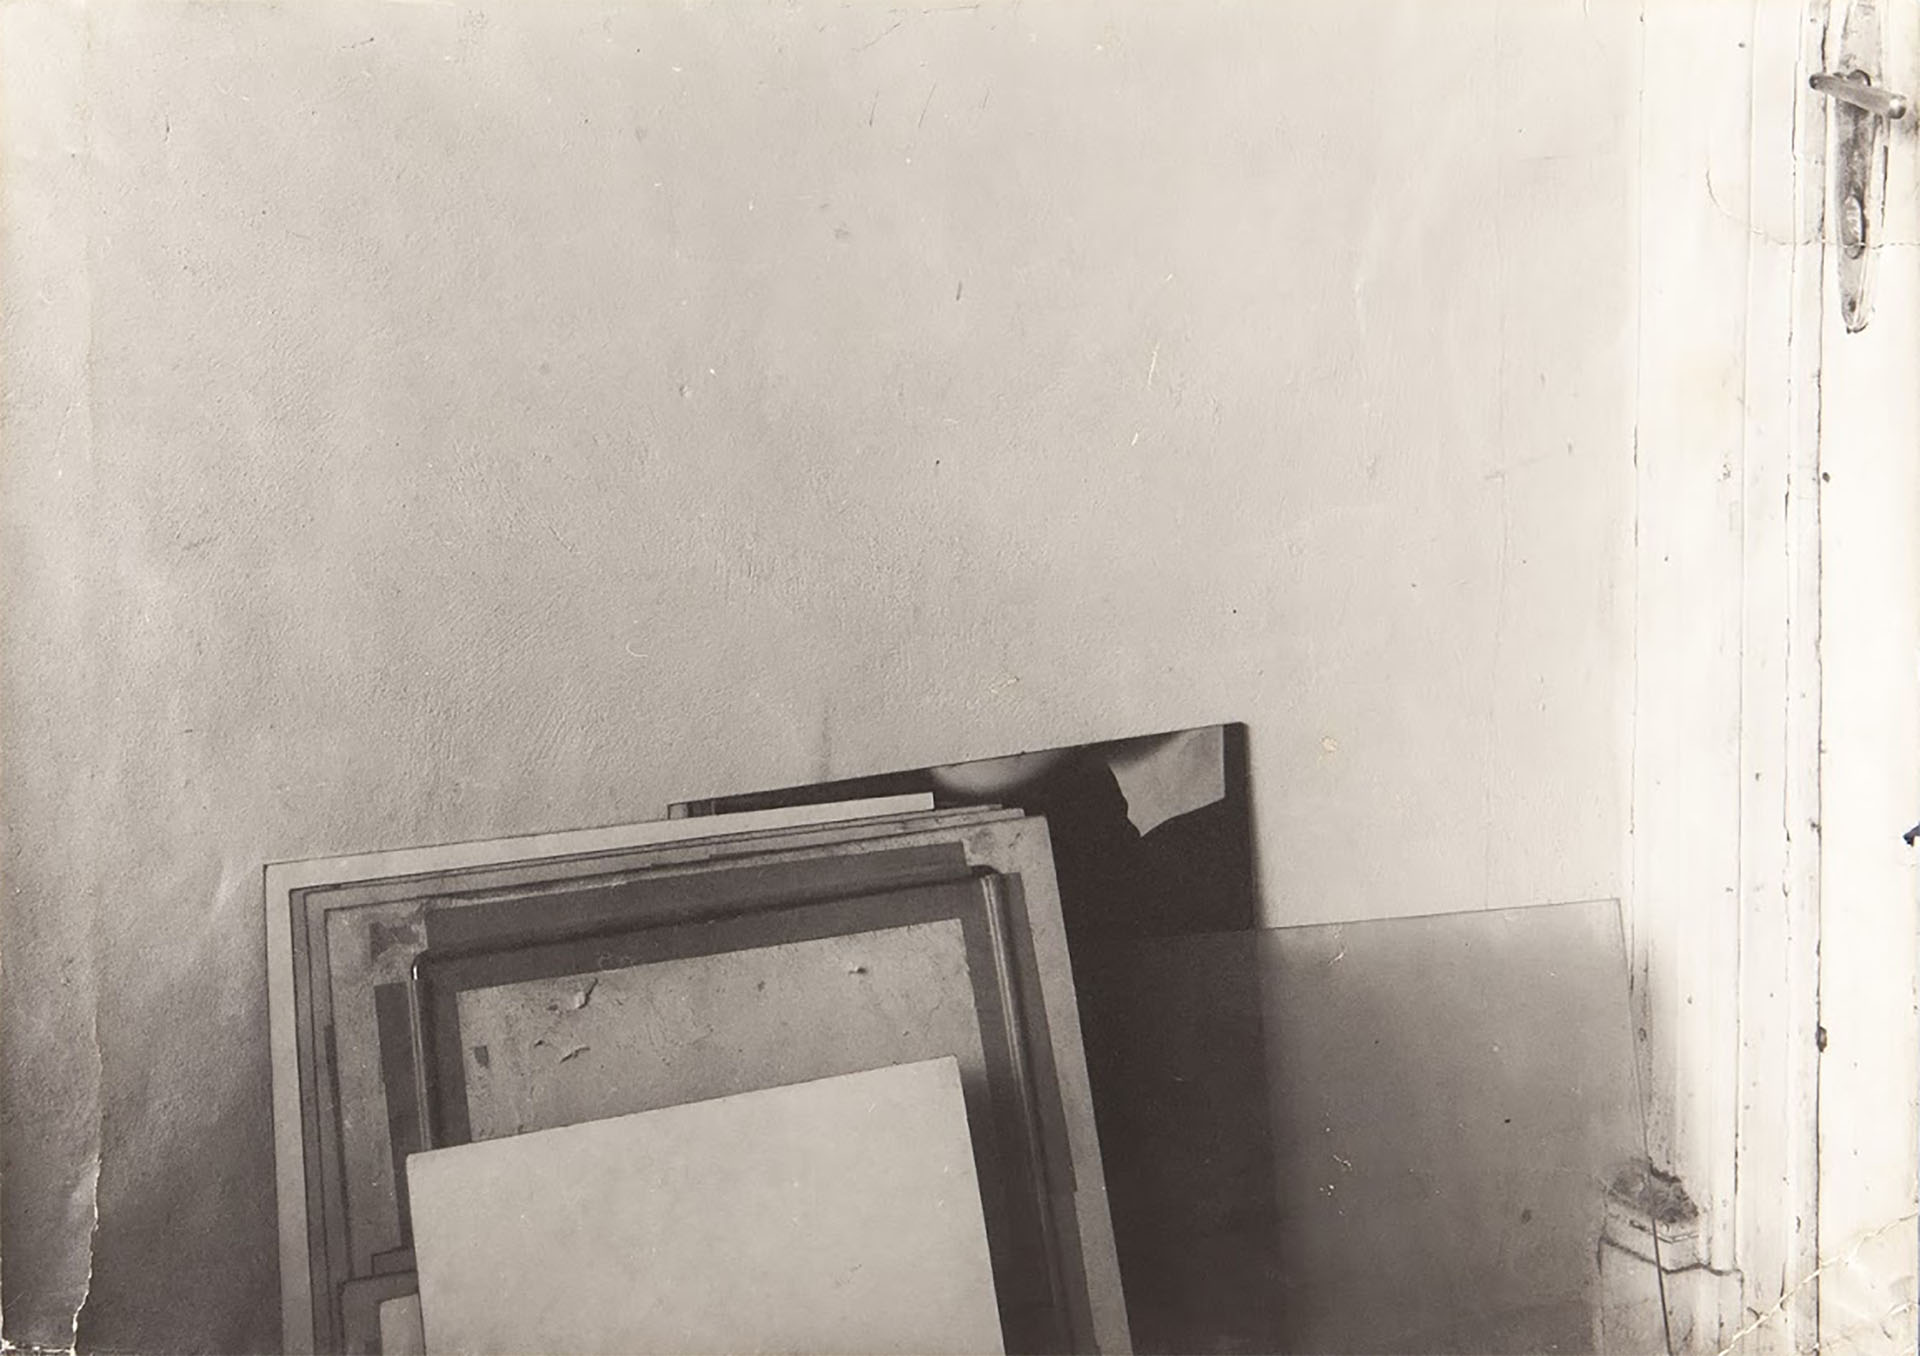 An Attempt at the Ideal Proportion III (1971). Collection of Miroslav Velfl, Prague